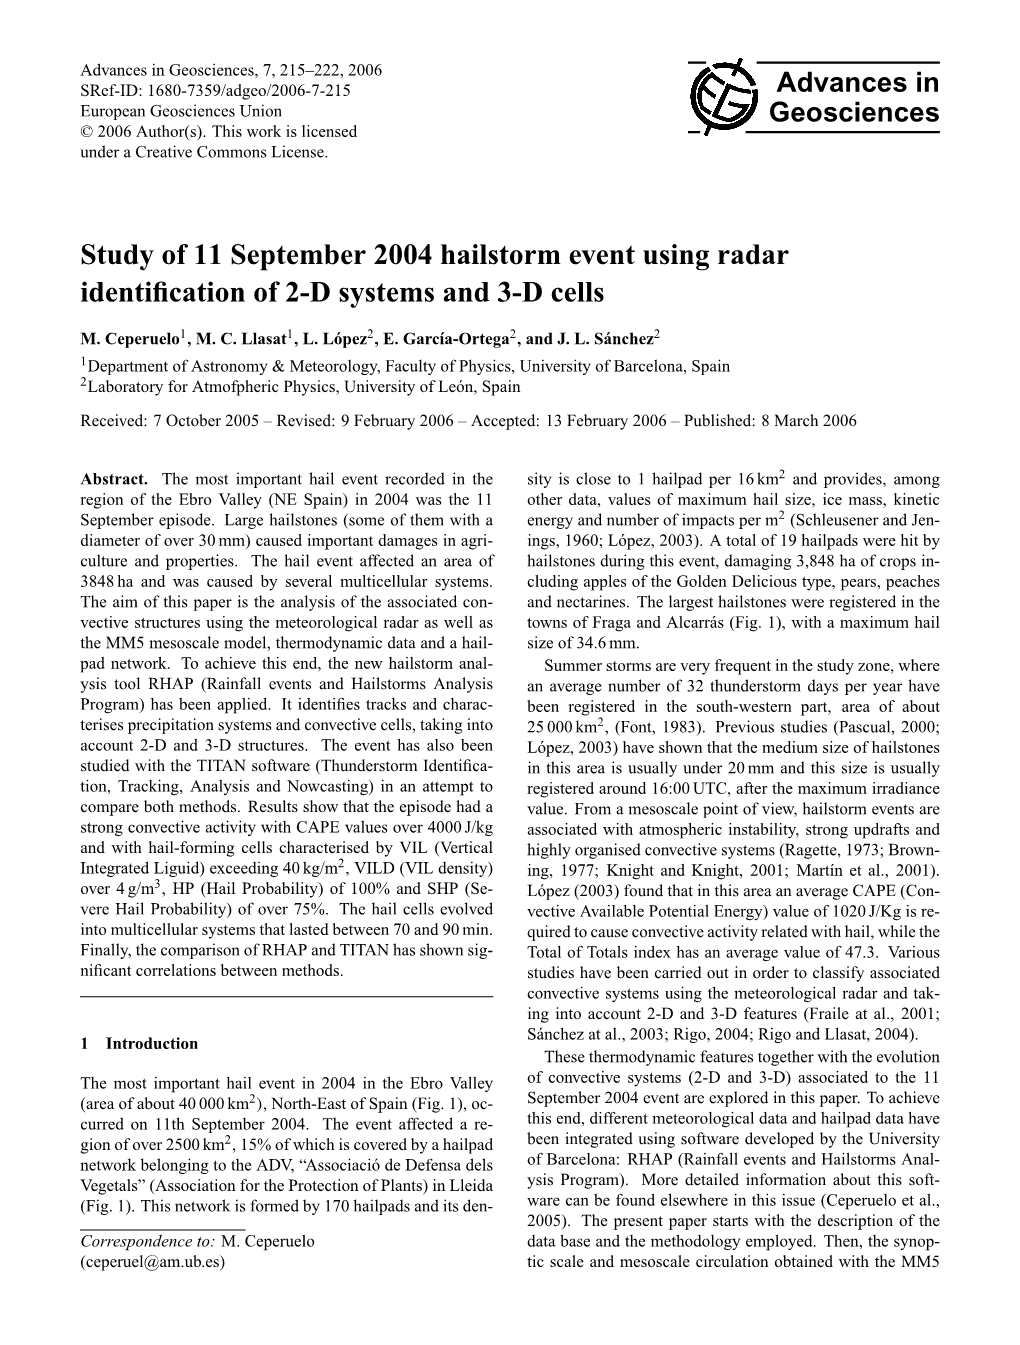 Study of 11 September 2004 Hailstorm Event Using Radar Identification of 2-D Systems and 3-D Cells